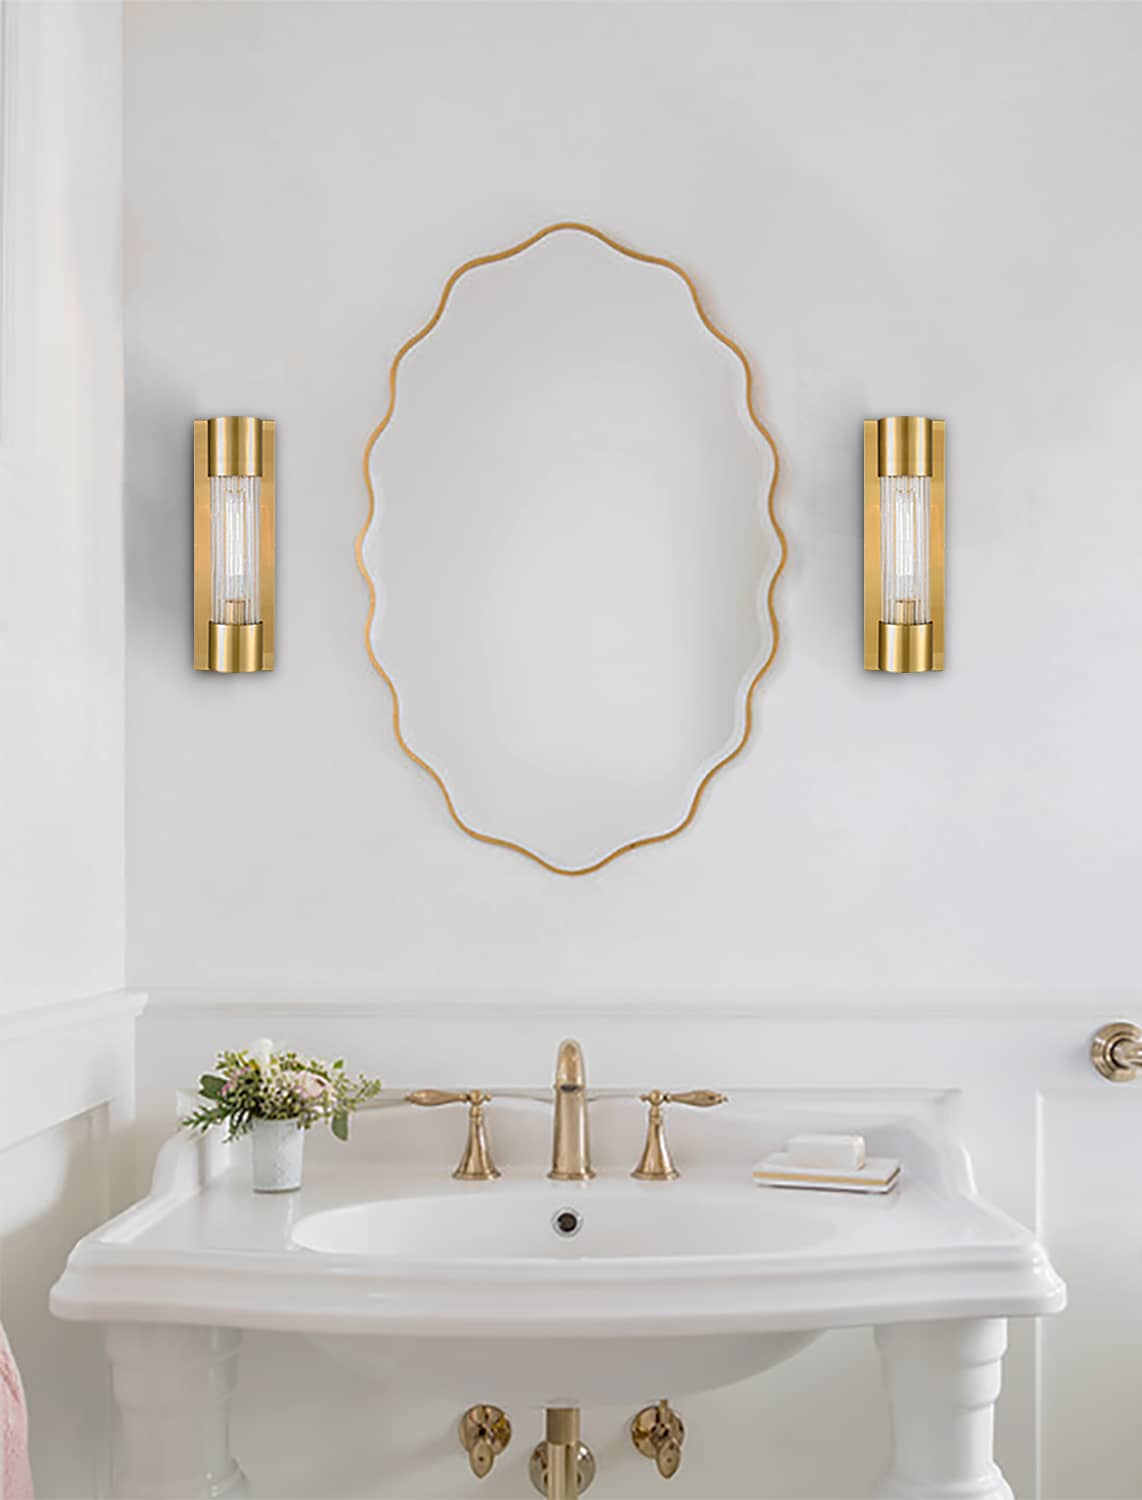 Modern Brass Wall Sconce Light Bathroom Vanity Light with Crackle Glass